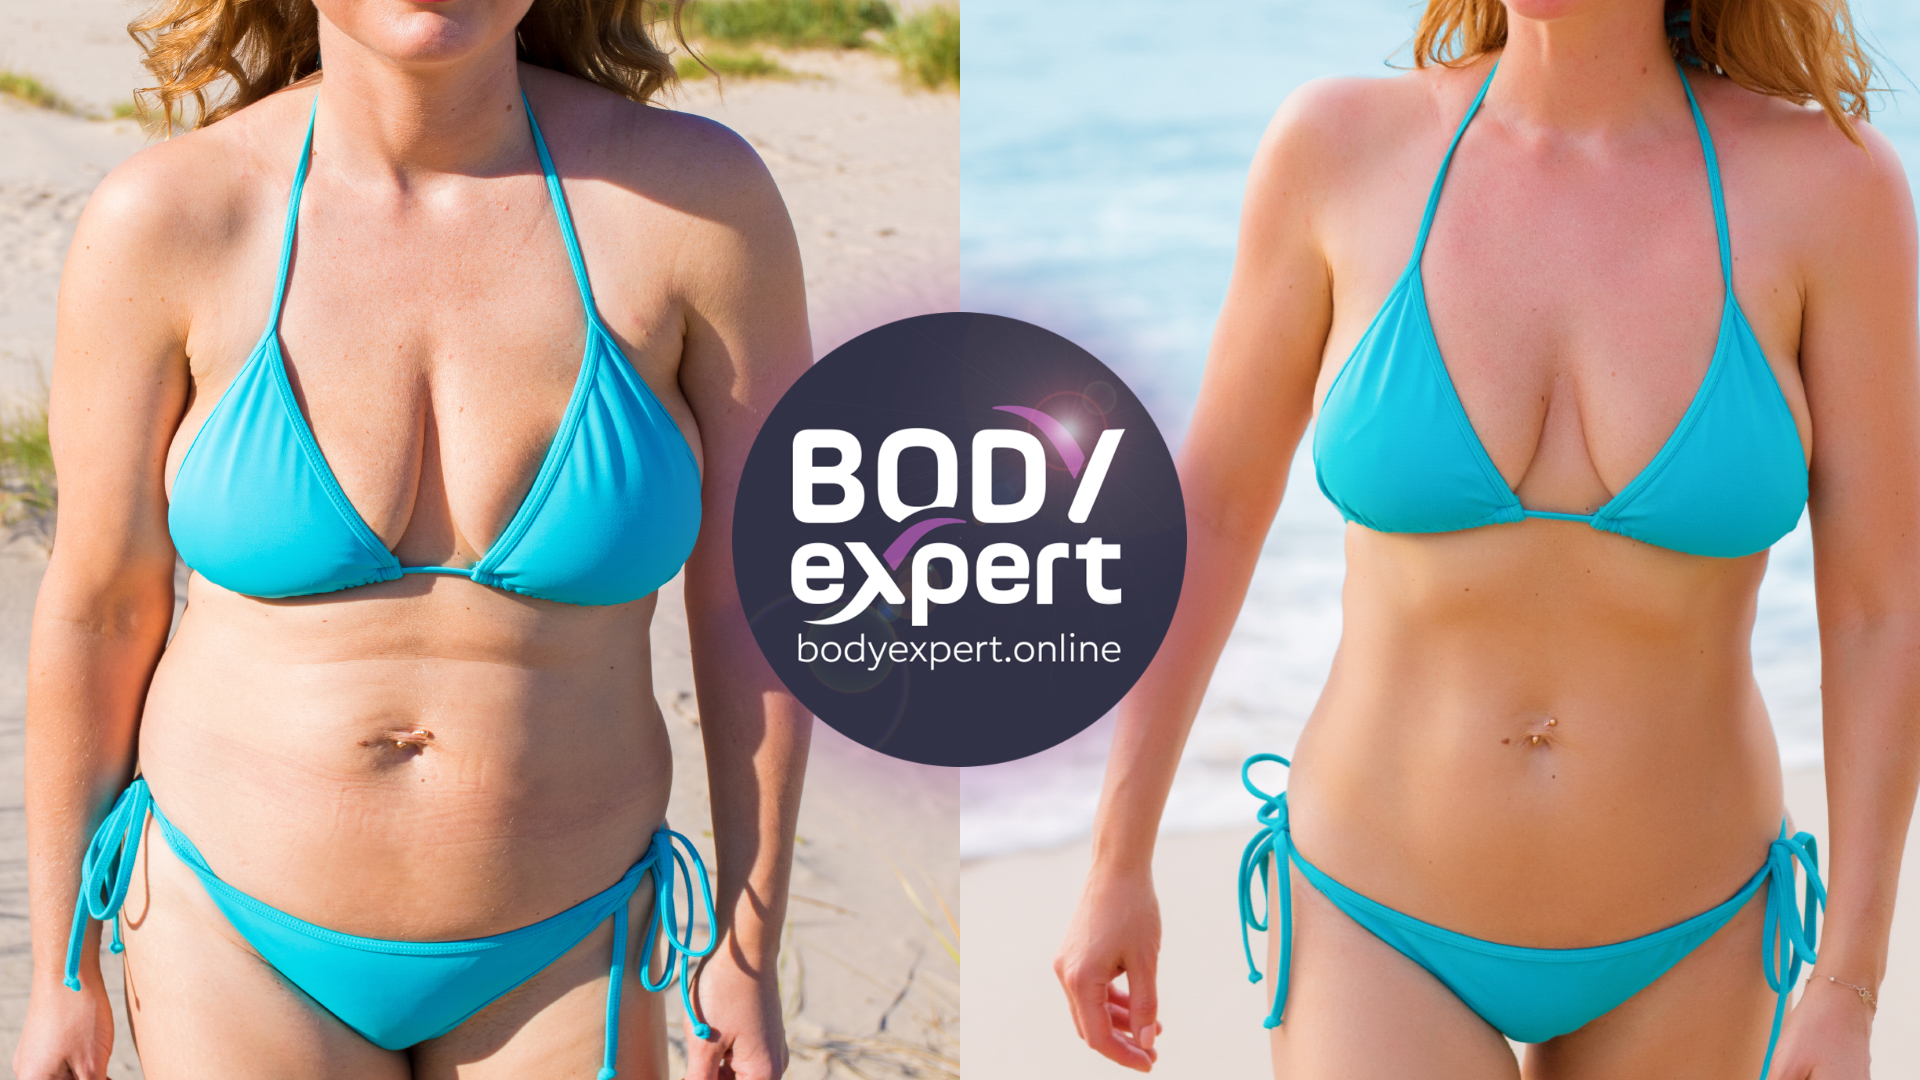 Stomach liposuction, the results before and after the surgery